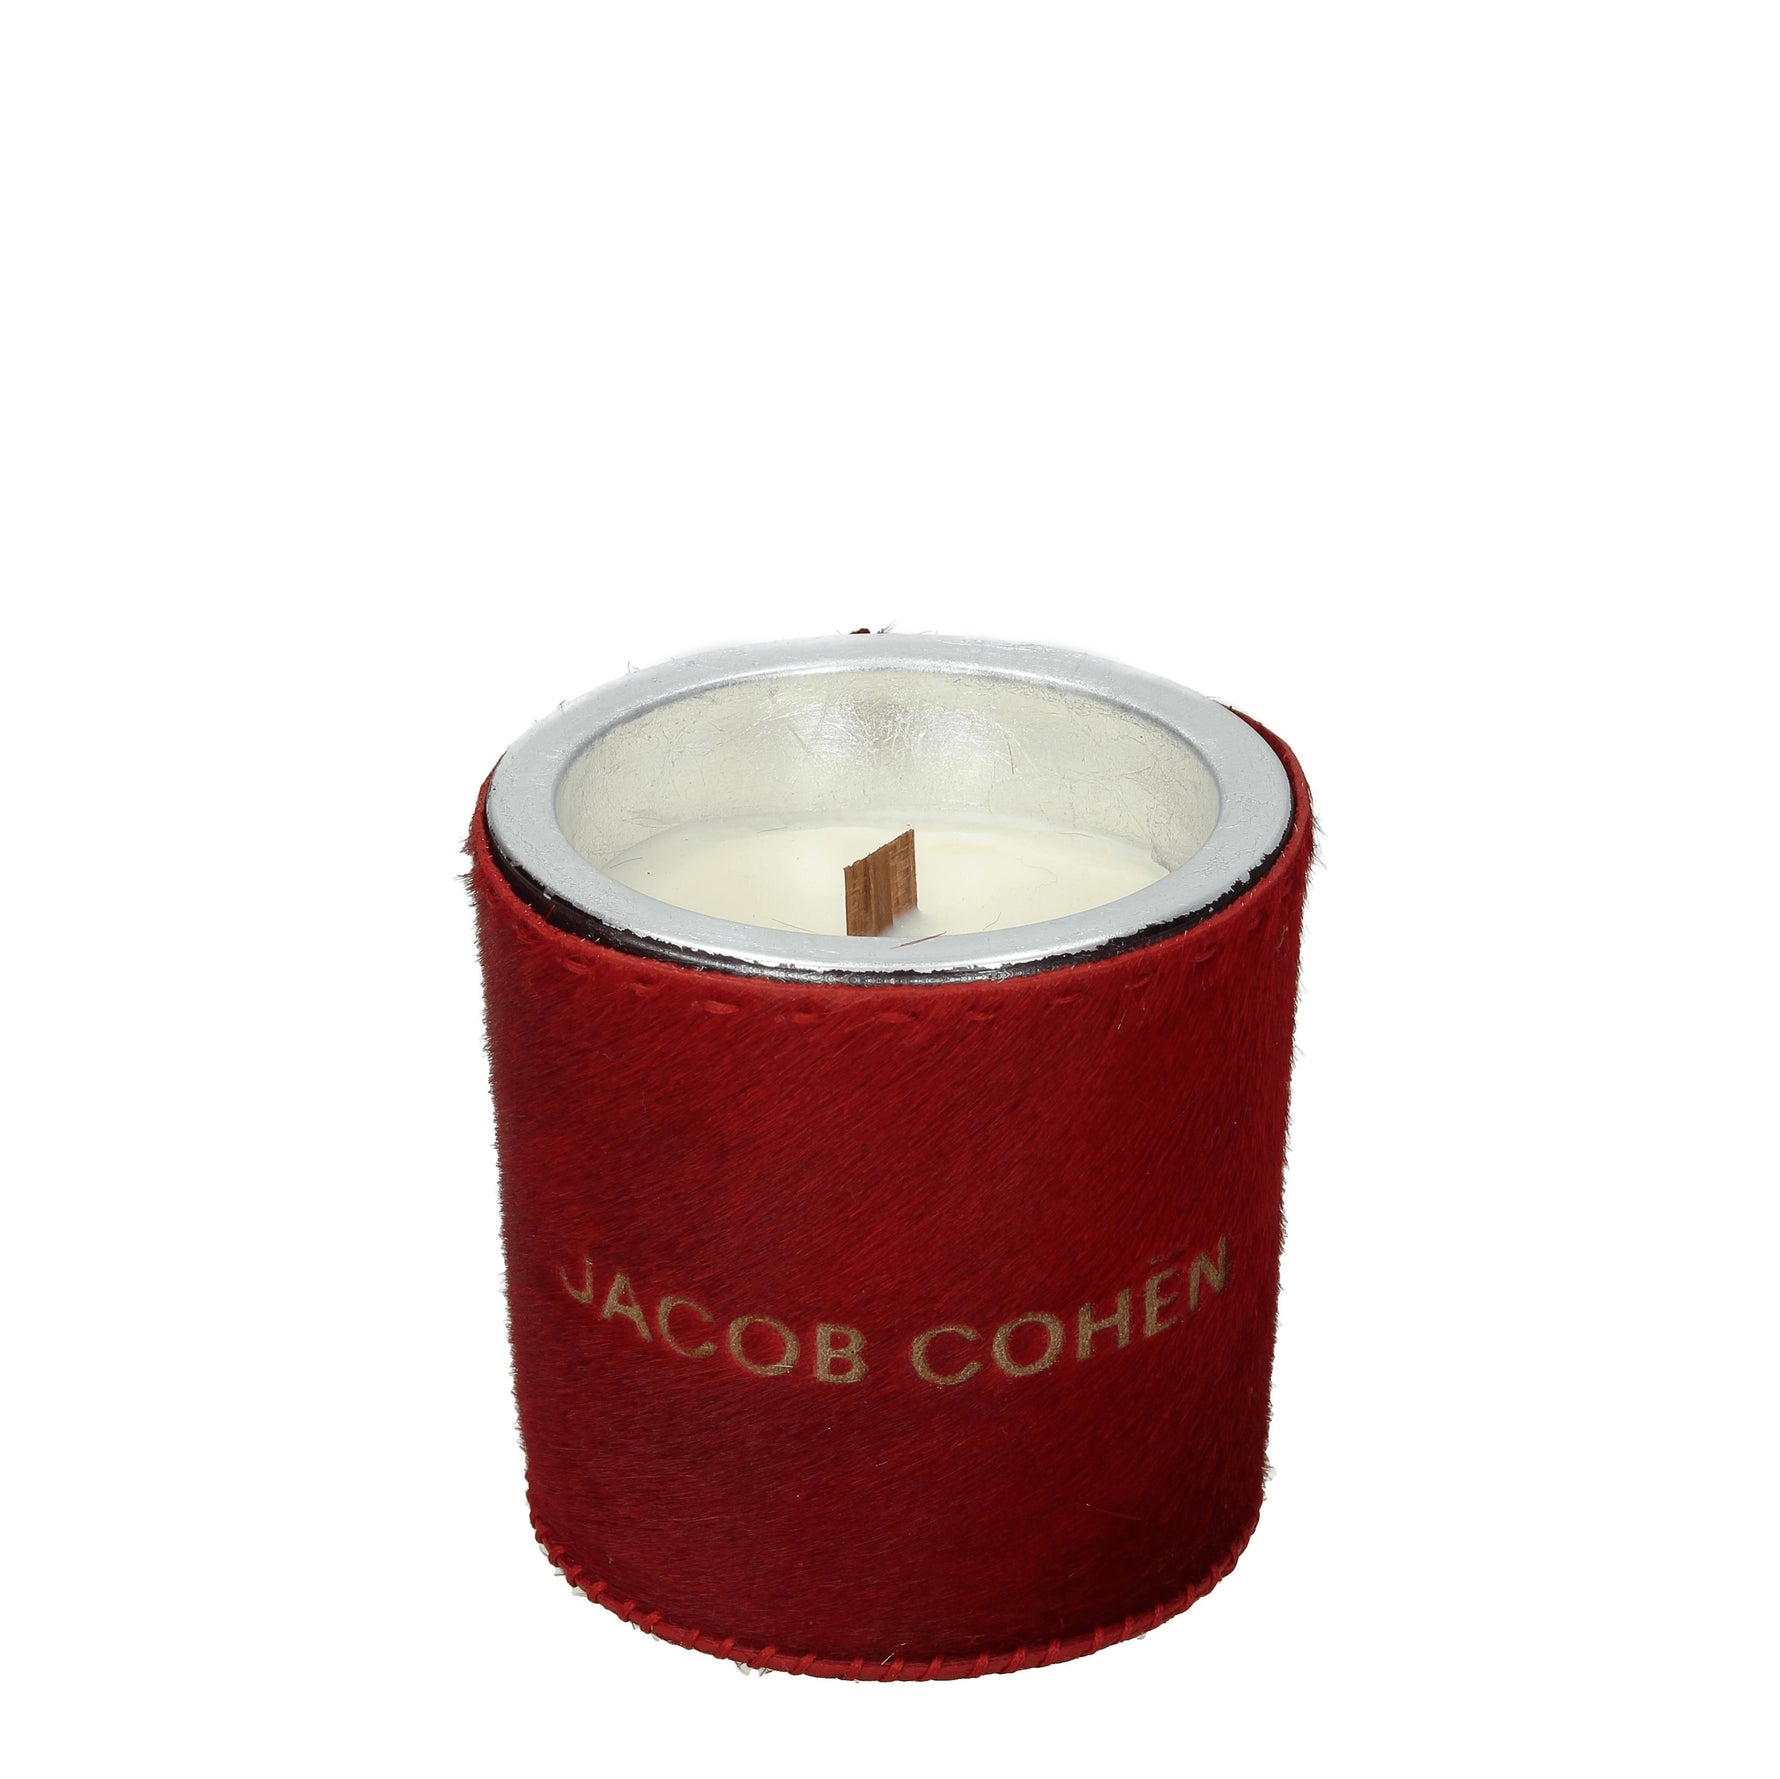 Jacob Cohen Idee Regalo handmade scented soy candle Donna Cavallino Rosso Rossetto